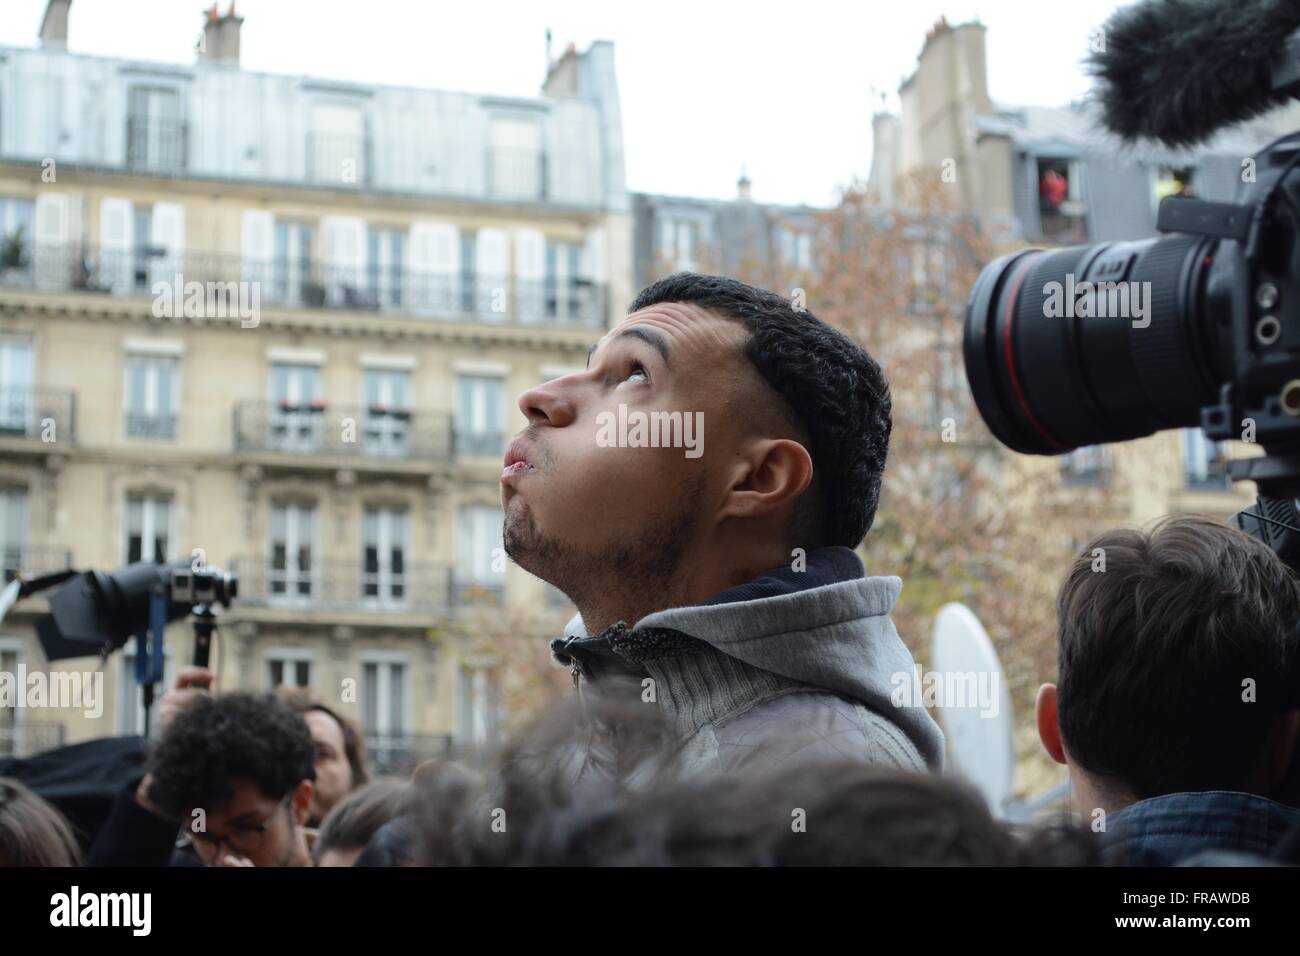 November 14th 2015. Paris, France. A man looks skywards as he pays tribute to those killed in the Paris terror attacks. ©Marc Ward/Alamy Stock Photo